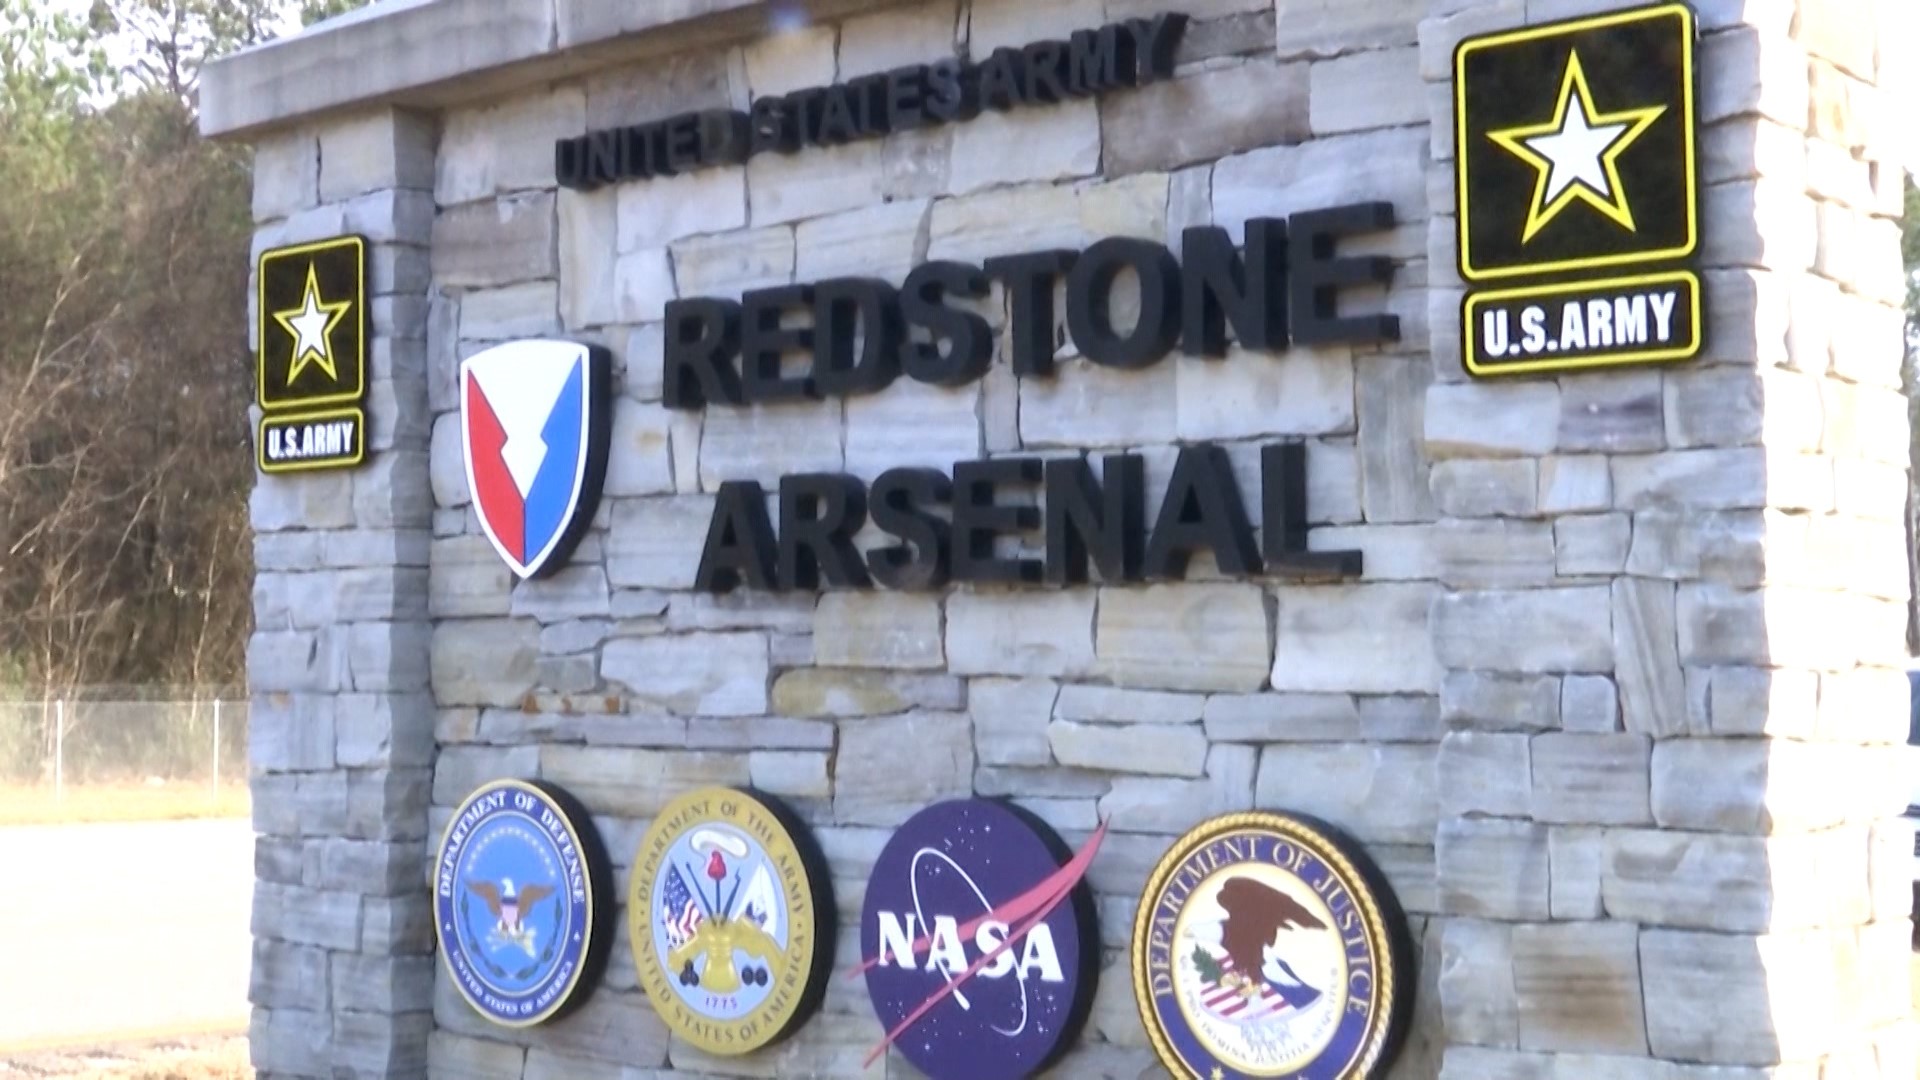 Redstone Arsenal brings benefits to cities across the Tennessee Valley.